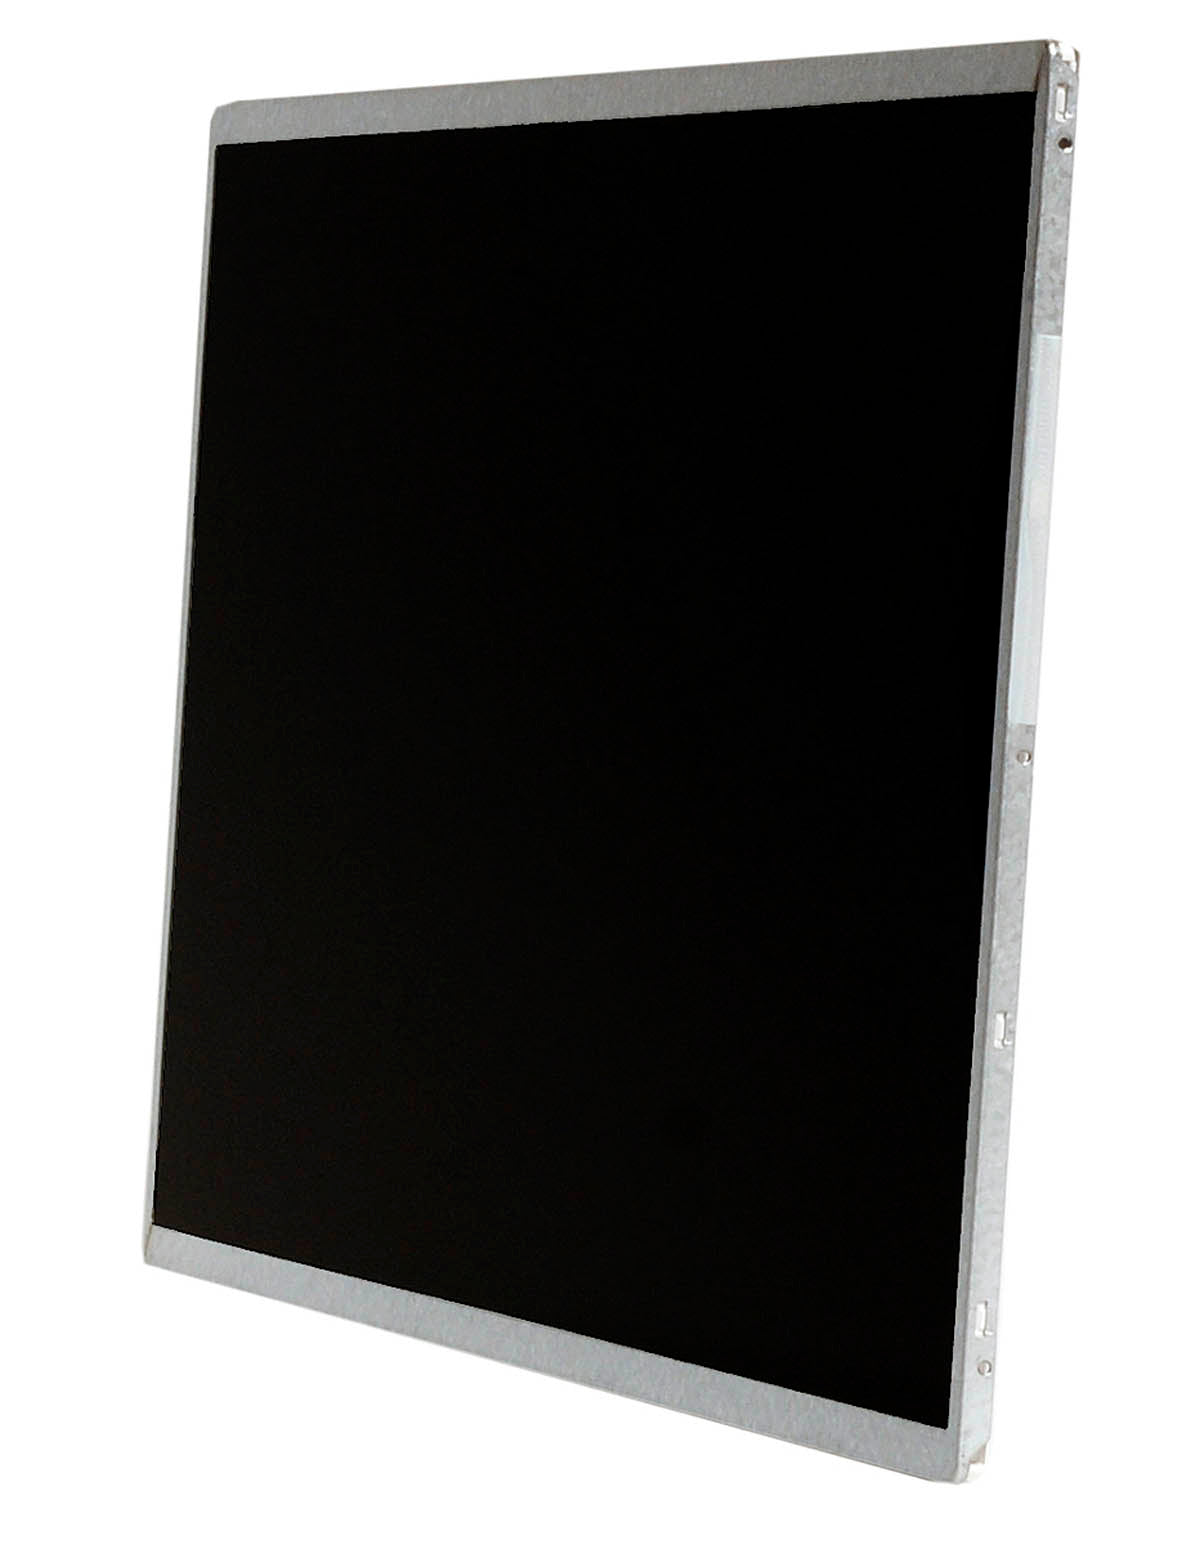 Replacement Screen For LTN140AT26-L01 HD 1366x768 Glossy LCD LED Display